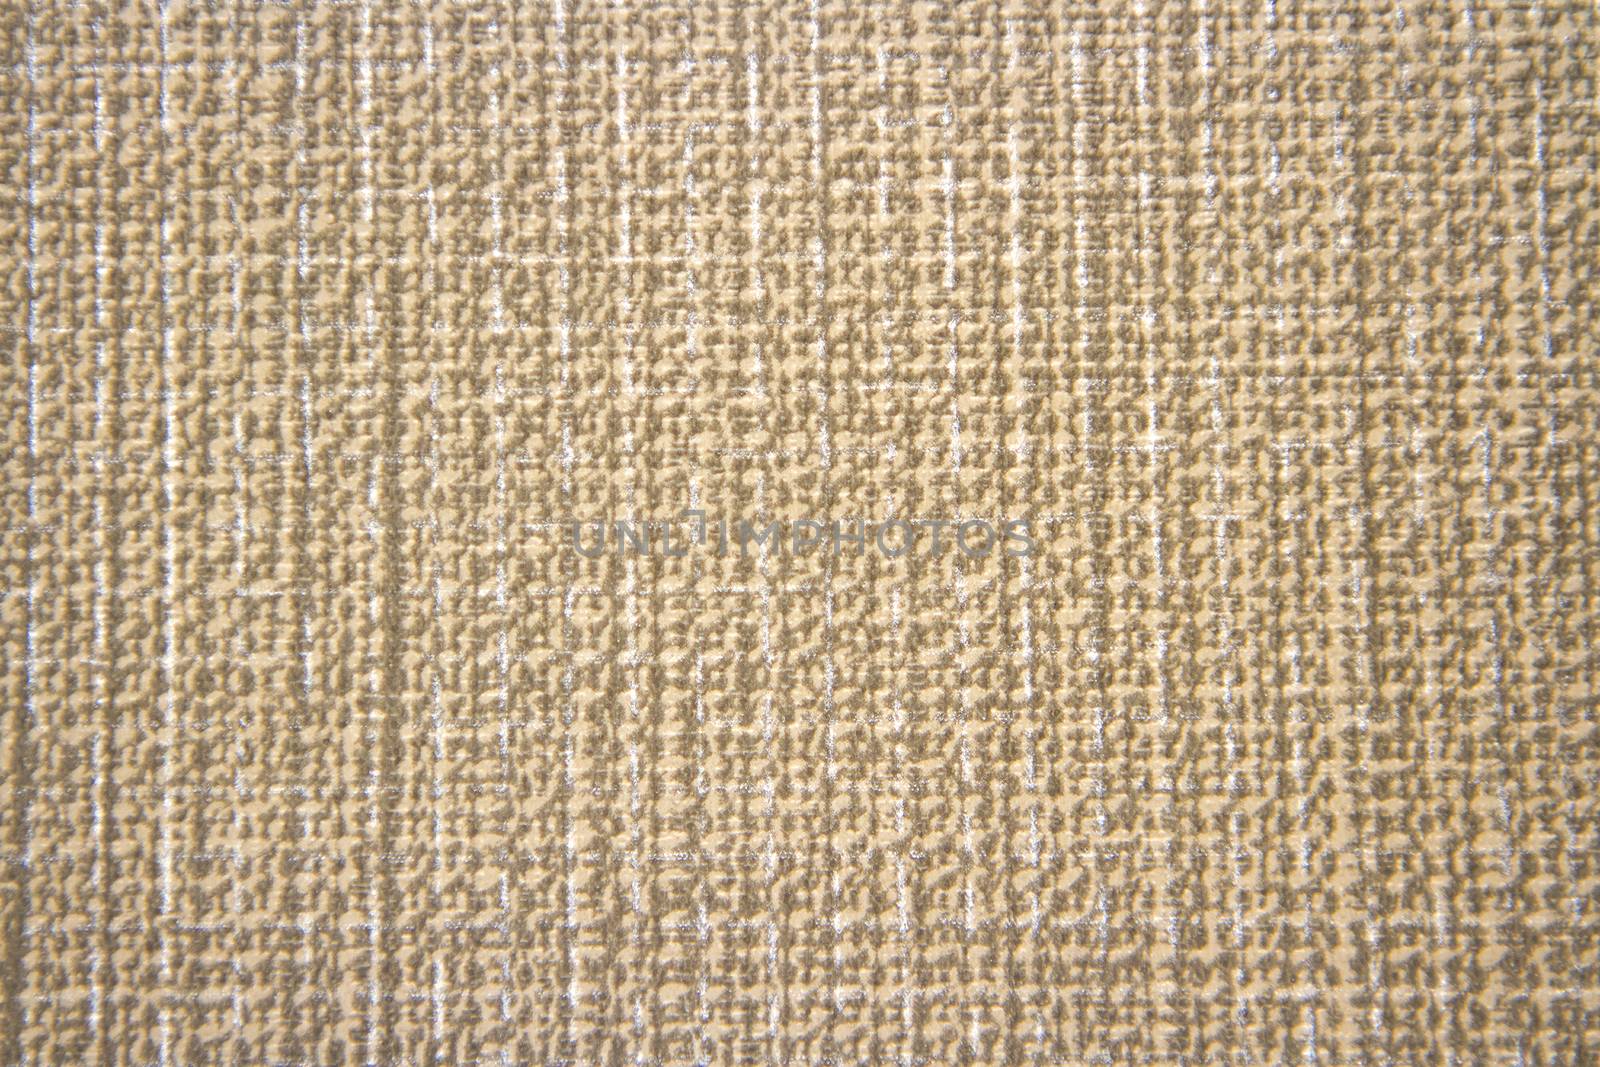 Striped linen sack texture background in brown